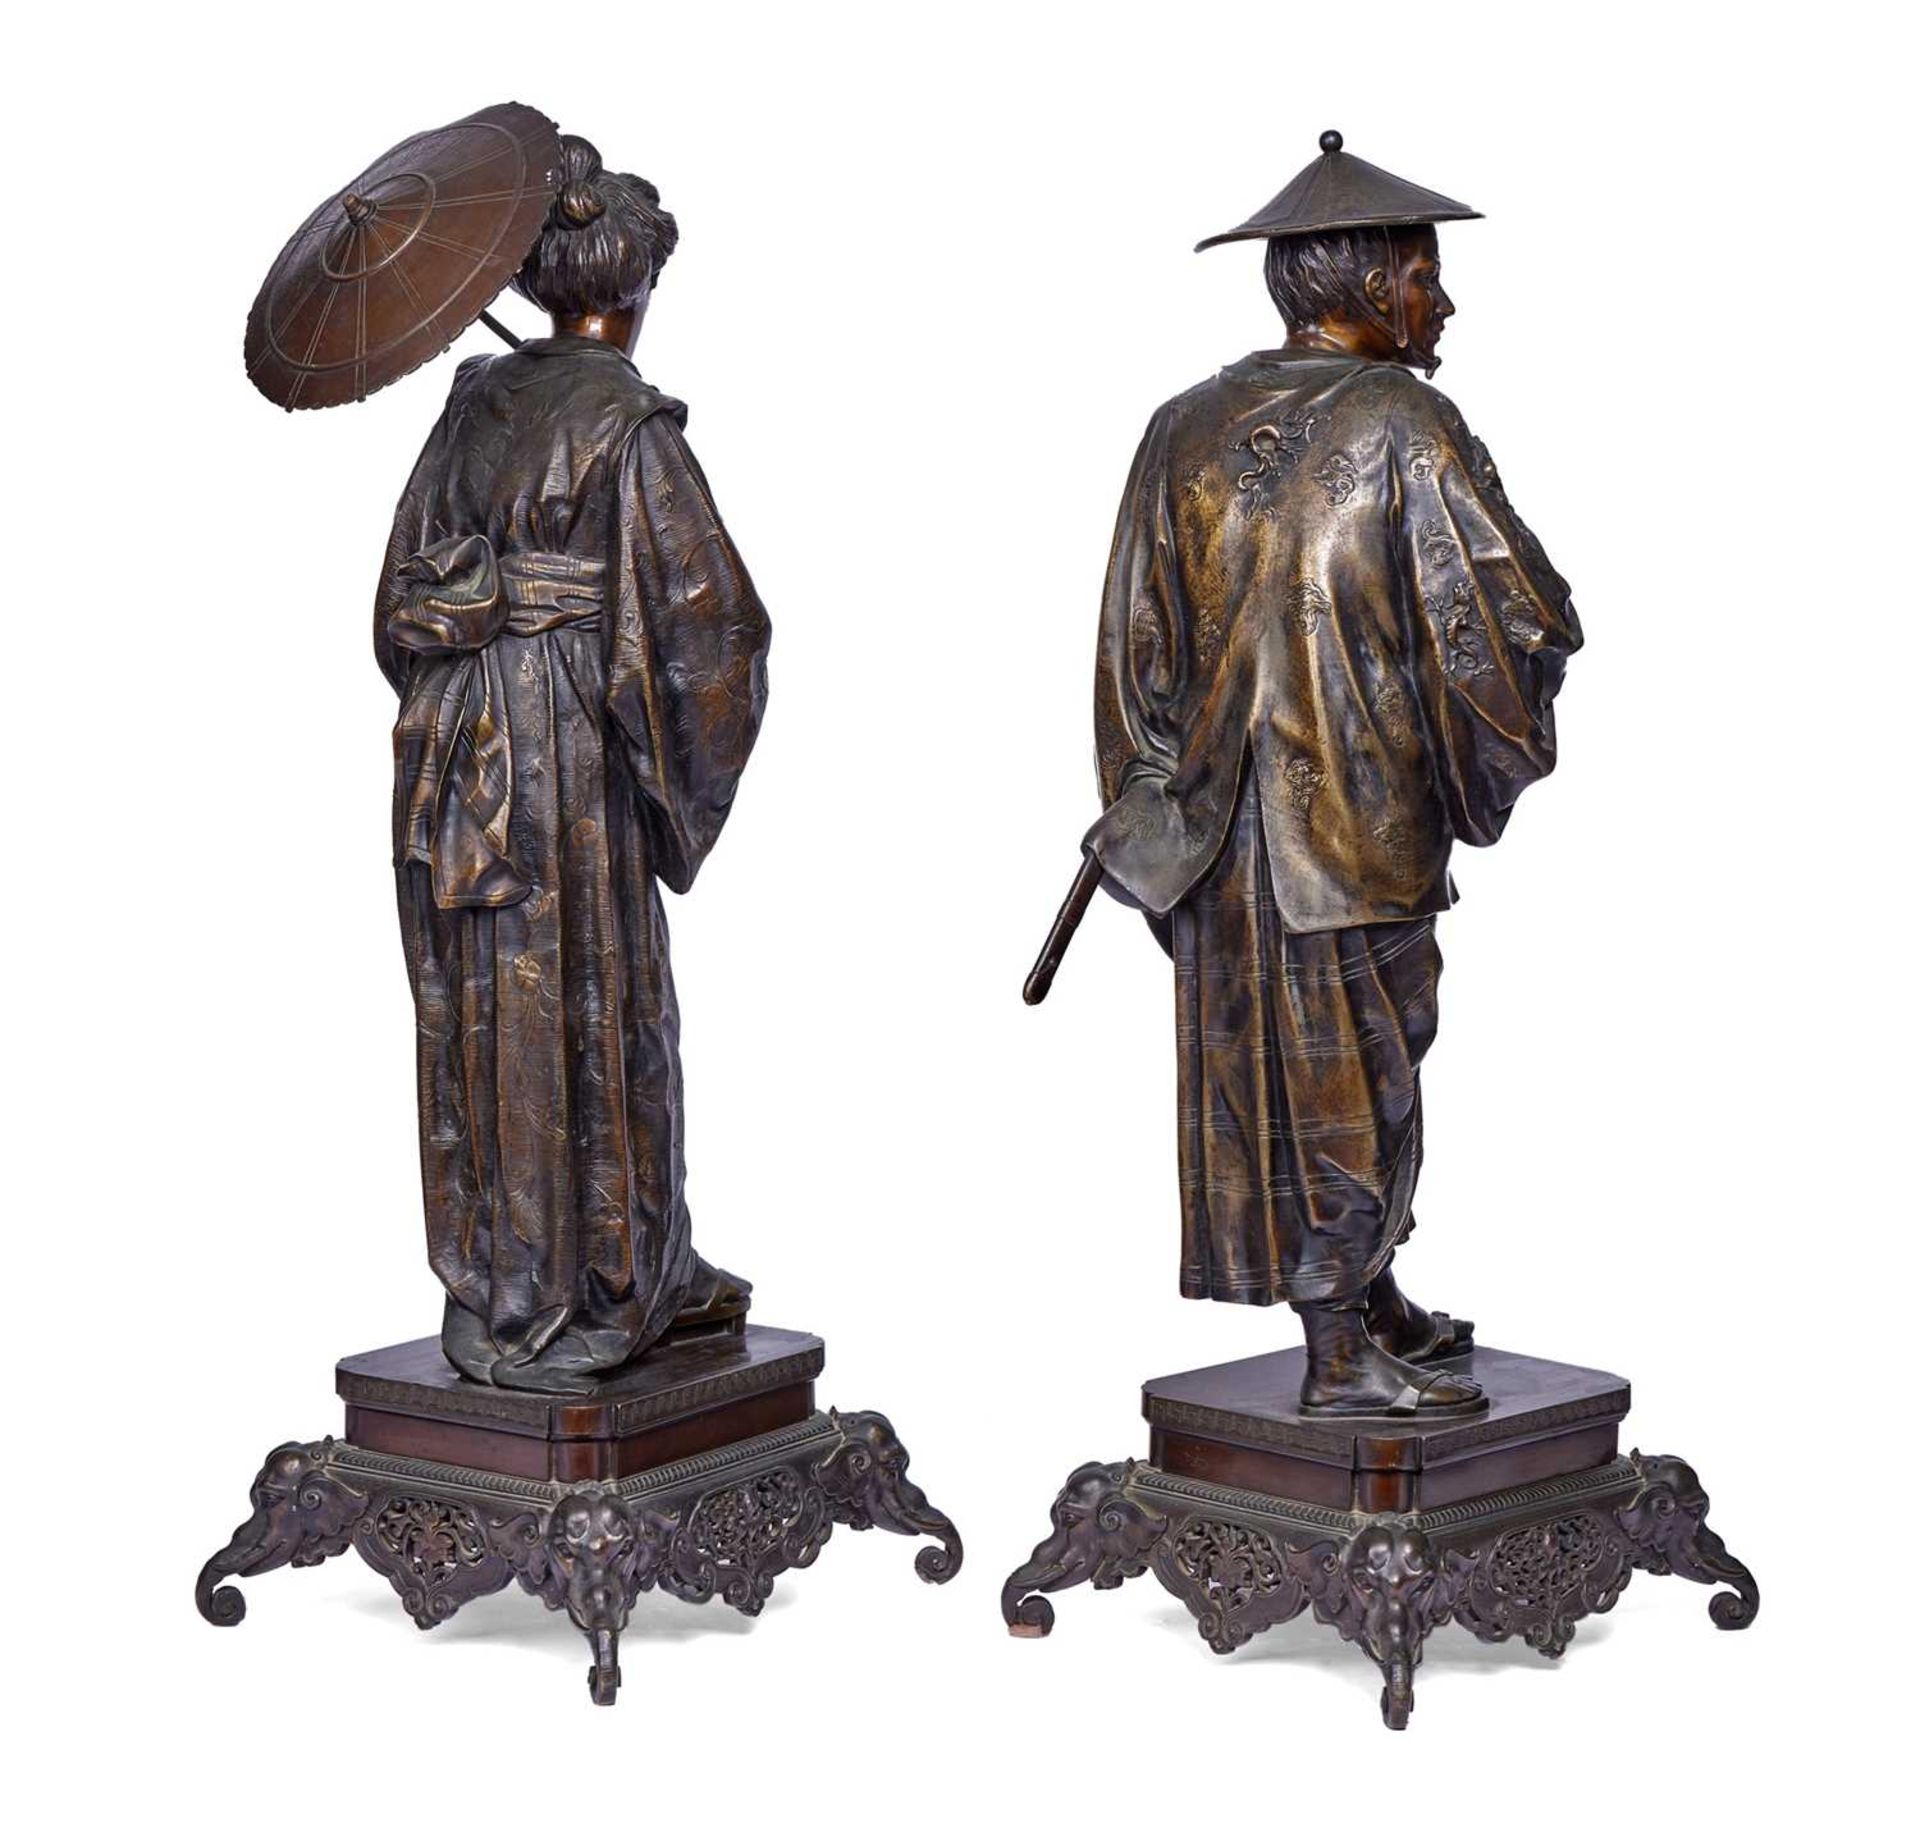 A FINE PAIR OF 19TH CENTURY FRENCH BRONZE 'JAPONISME' FIGURES - Image 3 of 4